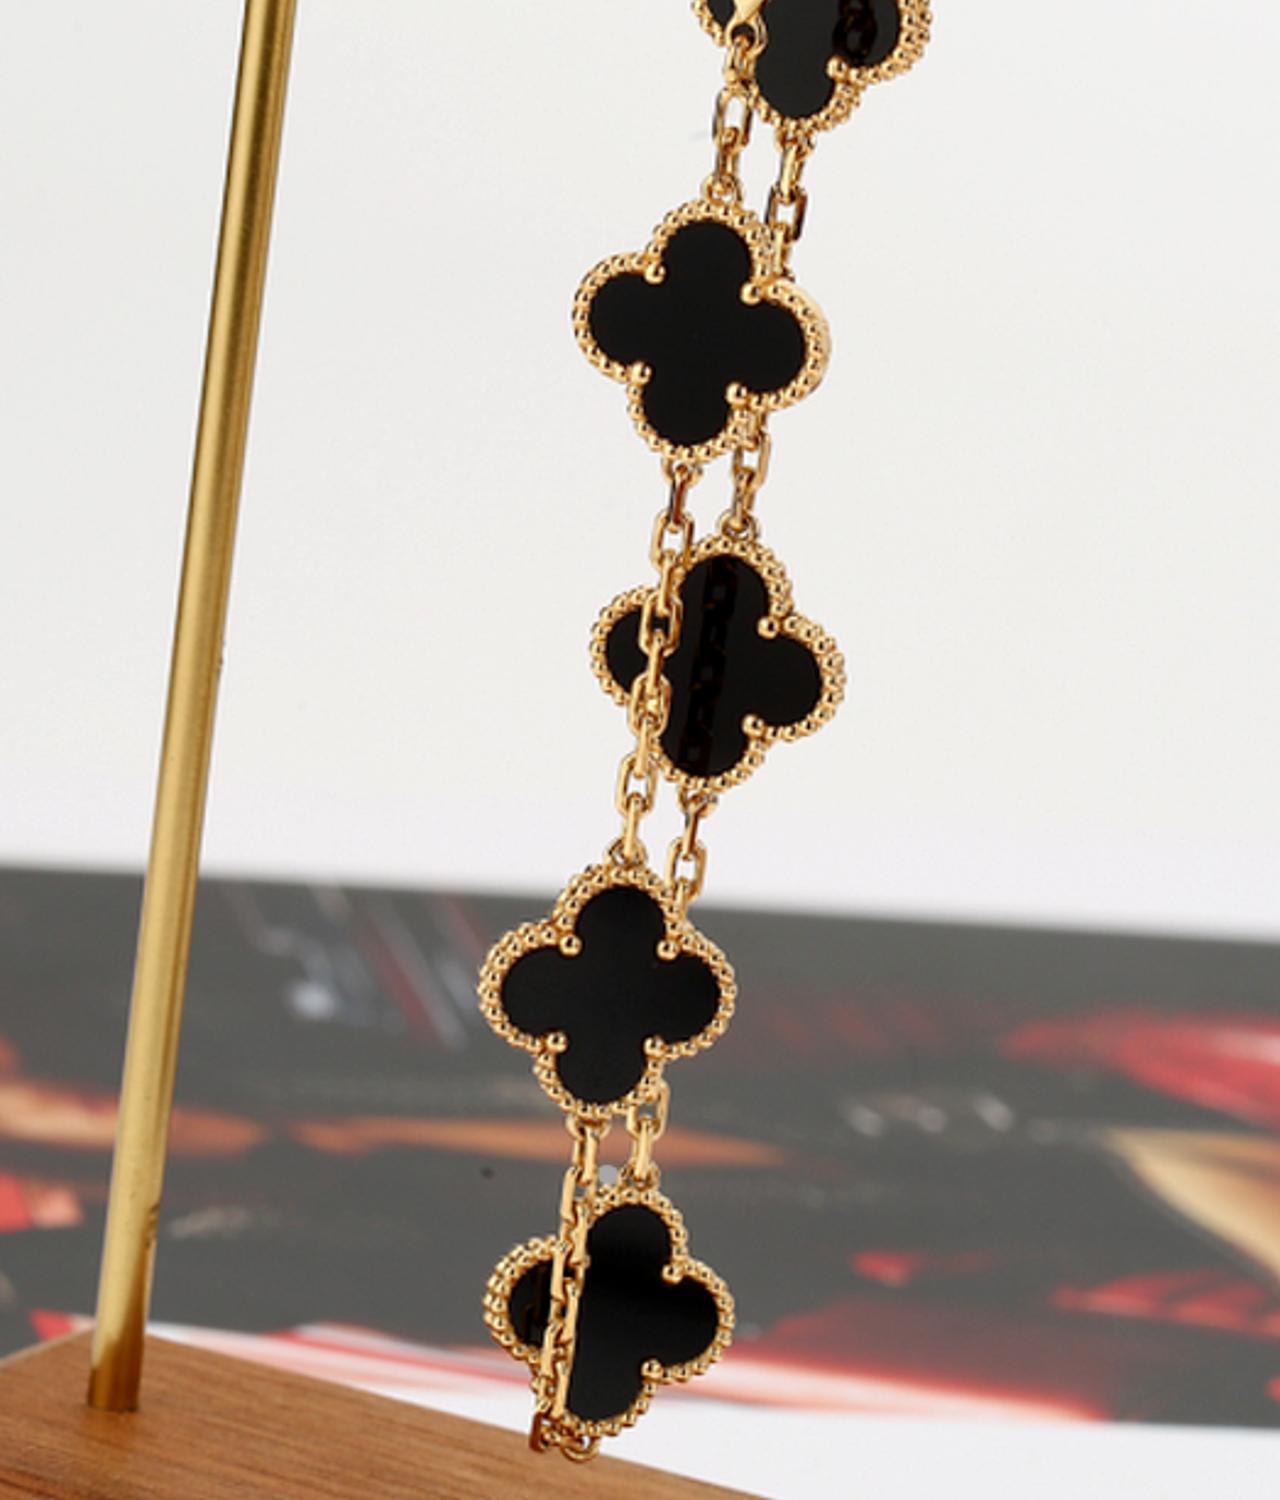 An 18k yellow gold bracelet from the Vintage Alhambra collection by Van Cleef and Arpels. The bracelet is made up of 5 iconic clover motifs, each set with a beaded edge and a black onyx inlay, set throughout the length of the chain.

The bracelet